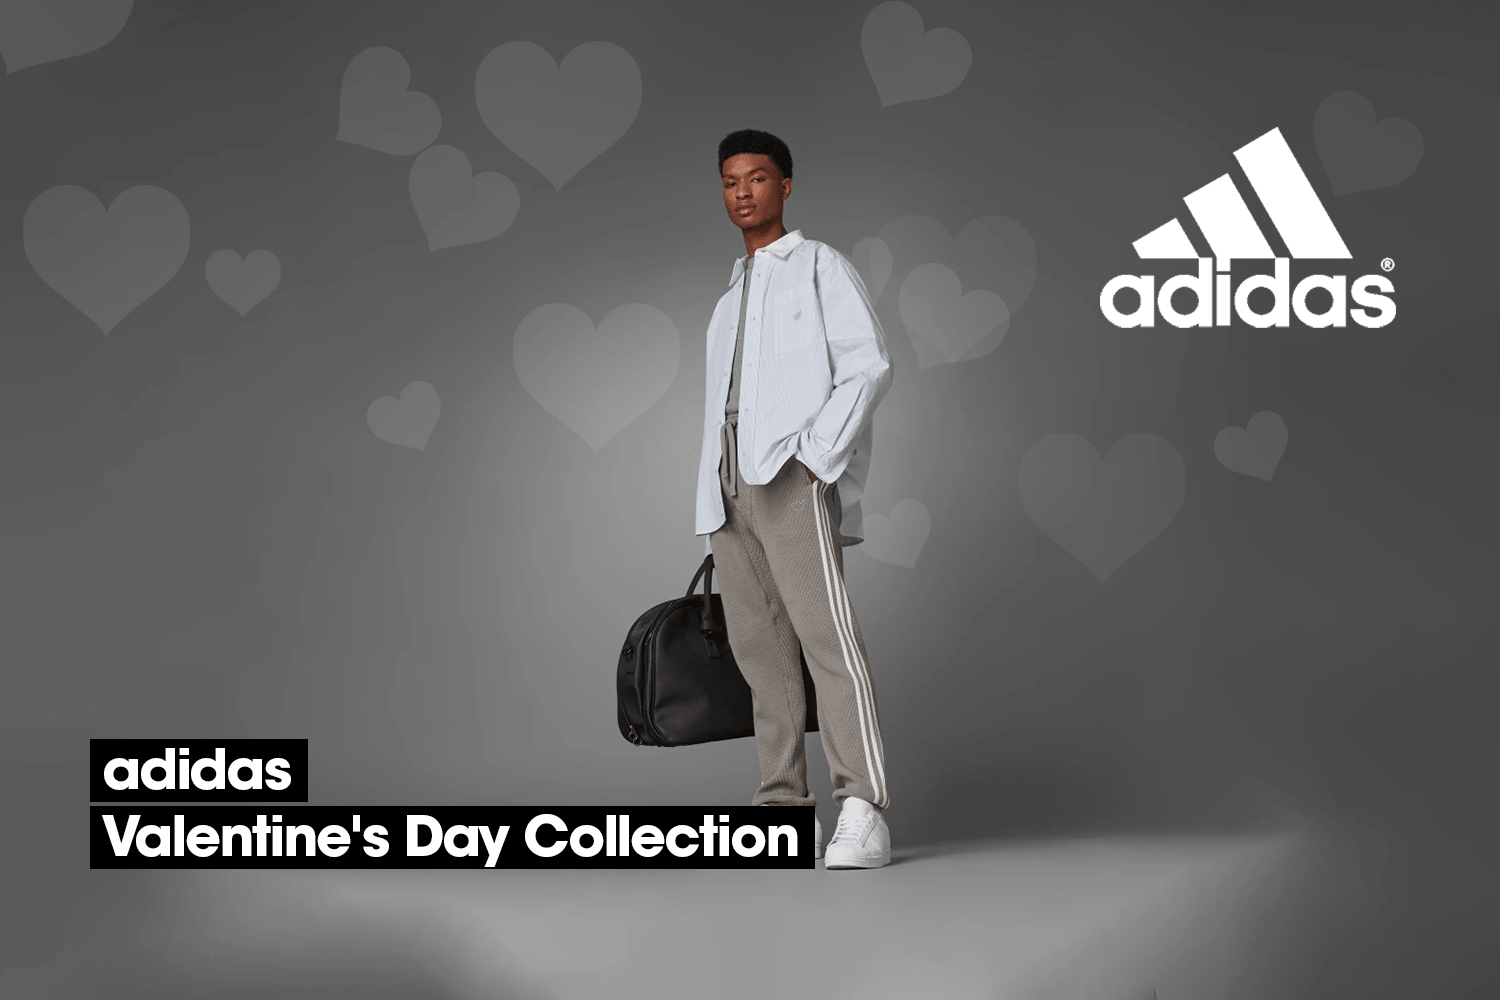 adidas celebrates Valentine's Day with a special collection